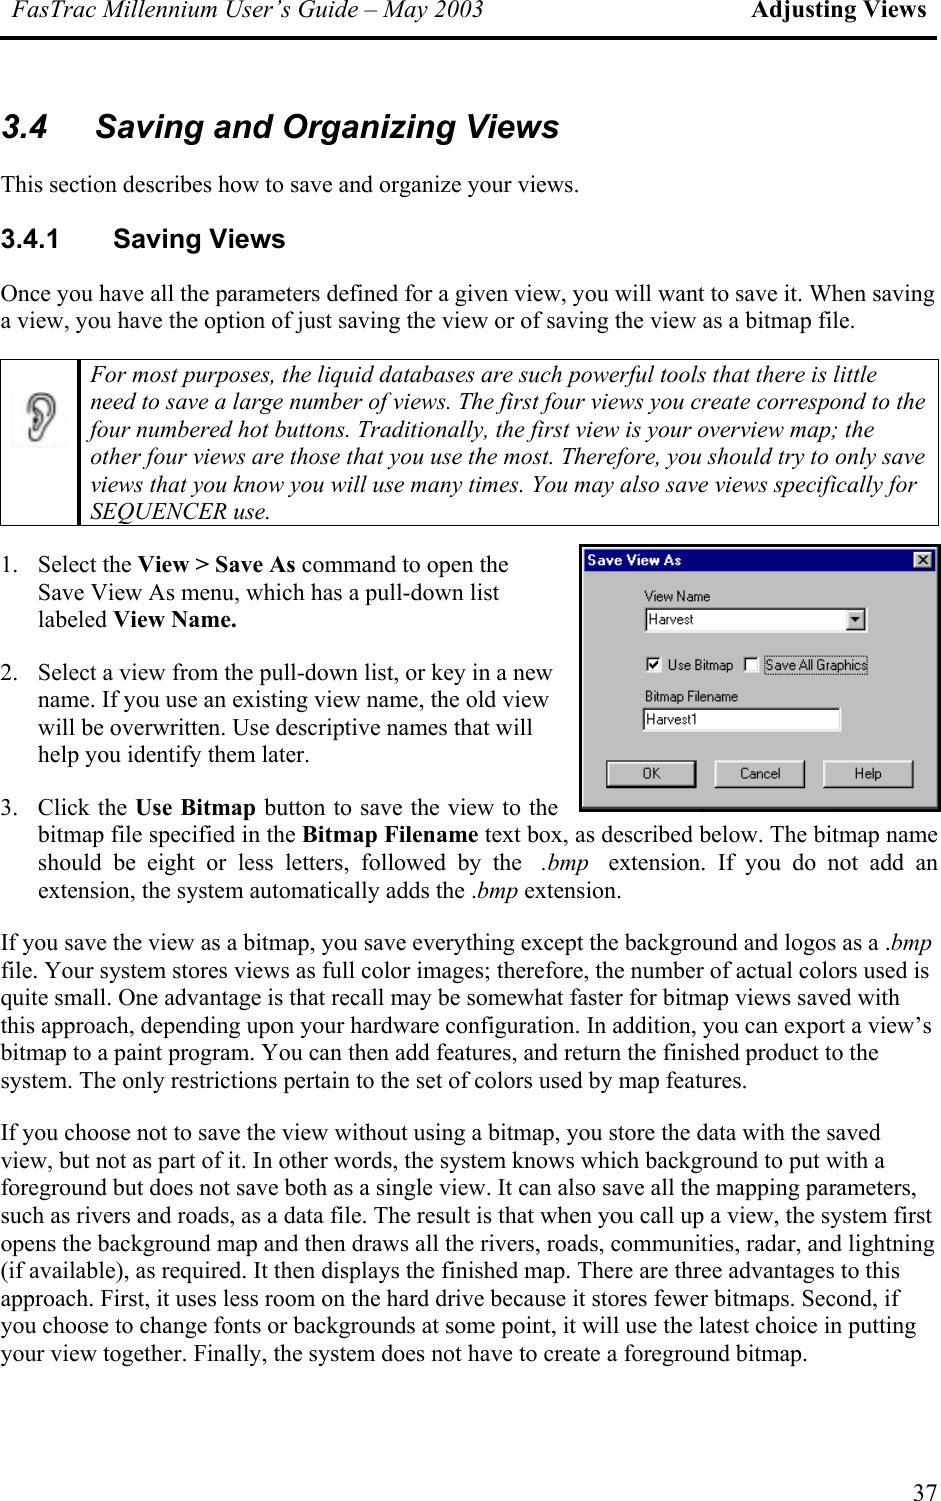 FasTrac Millennium User’s Guide – May 2003 Adjusting Views 3.4  Saving and Organizing Views This section describes how to save and organize your views. 3.4.1 Saving Views Once you have all the parameters defined for a given view, you will want to save it. When saving a view, you have the option of just saving the view or of saving the view as a bitmap file.  For most purposes, the liquid databases are such powerful tools that there is little need to save a large number of views. The first four views you create correspond to the four numbered hot buttons. Traditionally, the first view is your overview map; the other four views are those that you use the most. Therefore, you should try to only save views that you know you will use many times. You may also save views specifically for SEQUENCER use. 1. Select the View &gt; Save As command to open the Save View As menu, which has a pull-down list labeled View Name. 2.  Select a view from the pull-down list, or key in a new name. If you use an existing view name, the old view will be overwritten. Use descriptive names that will help you identify them later. 3. Click the Use Bitmap button to save the view to the bitmap file specified in the Bitmap Filename text box, as described below. The bitmap name should be eight or less letters, followed by the .bmp extension. If you do not add an extension, the system automatically adds the .bmp extension. If you save the view as a bitmap, you save everything except the background and logos as a .bmp file. Your system stores views as full color images; therefore, the number of actual colors used is quite small. One advantage is that recall may be somewhat faster for bitmap views saved with this approach, depending upon your hardware configuration. In addition, you can export a view’s bitmap to a paint program. You can then add features, and return the finished product to the system. The only restrictions pertain to the set of colors used by map features. If you choose not to save the view without using a bitmap, you store the data with the saved view, but not as part of it. In other words, the system knows which background to put with a foreground but does not save both as a single view. It can also save all the mapping parameters, such as rivers and roads, as a data file. The result is that when you call up a view, the system first opens the background map and then draws all the rivers, roads, communities, radar, and lightning (if available), as required. It then displays the finished map. There are three advantages to this approach. First, it uses less room on the hard drive because it stores fewer bitmaps. Second, if you choose to change fonts or backgrounds at some point, it will use the latest choice in putting your view together. Finally, the system does not have to create a foreground bitmap. 37 